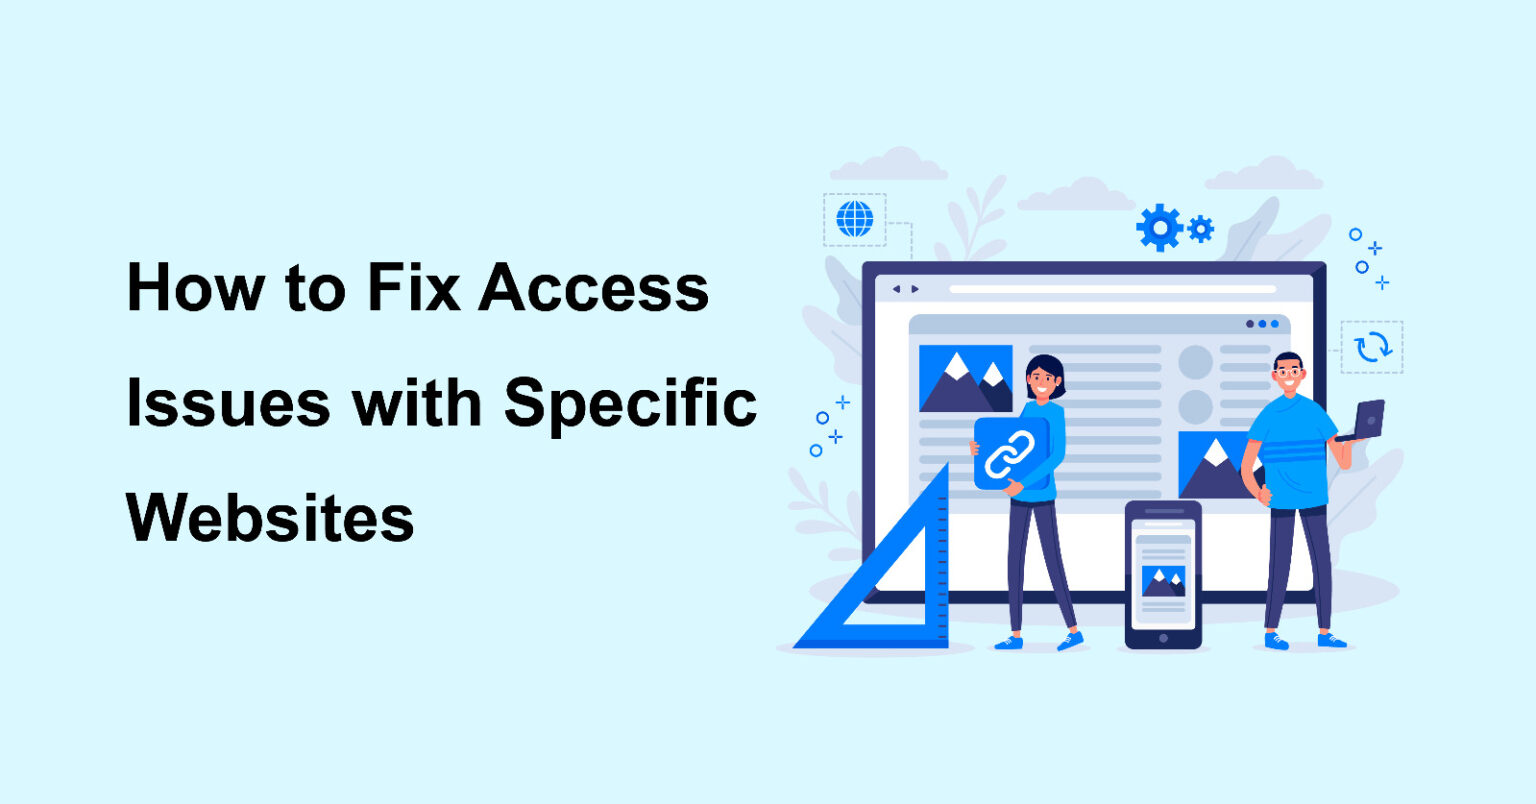 How to Fix Access Issues with Specific Websites